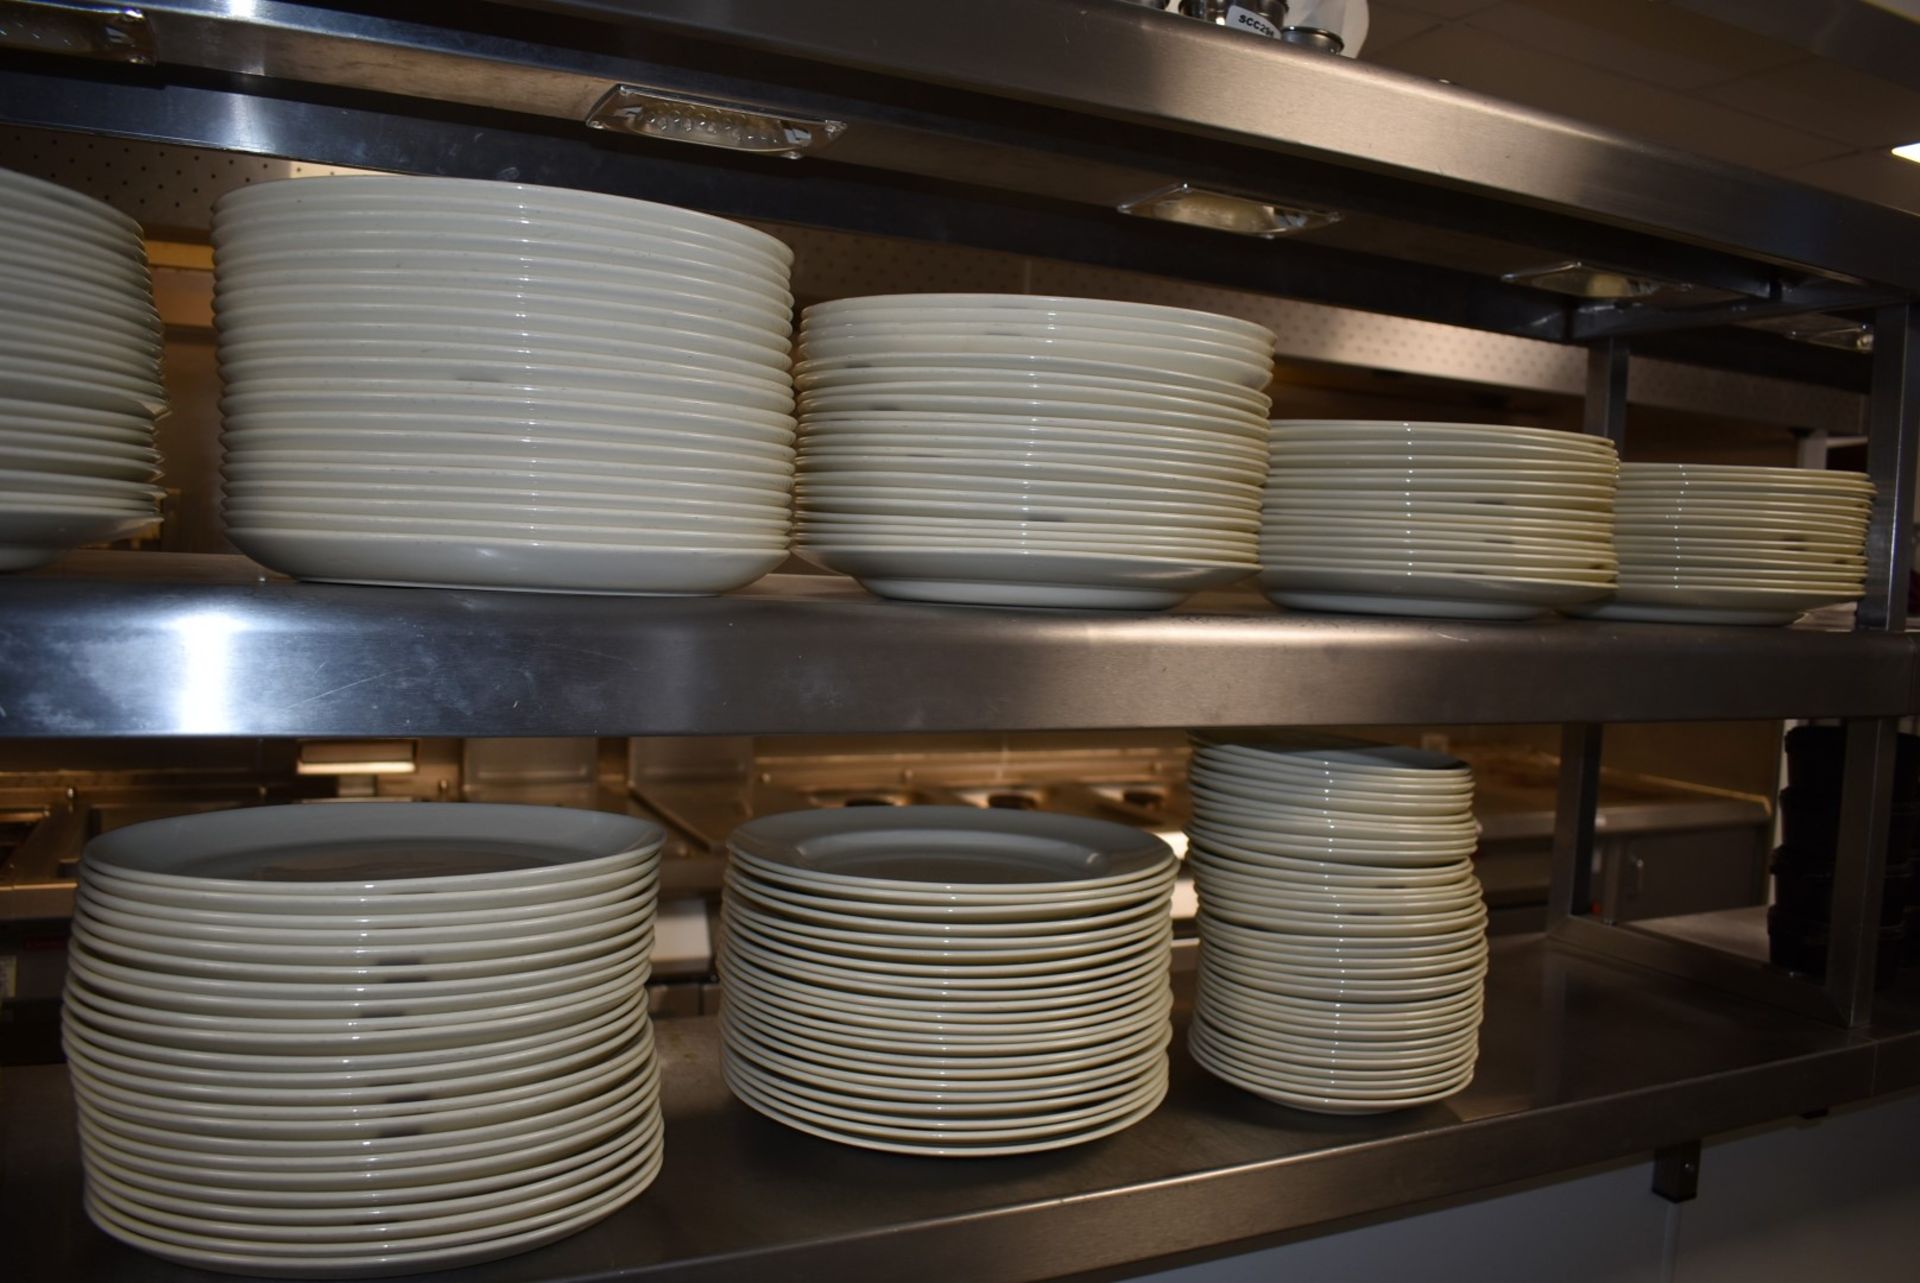 Approx 210 x Ceramic Dinner Plates - Various Sizes - From a Popular American Diner - Image 3 of 8